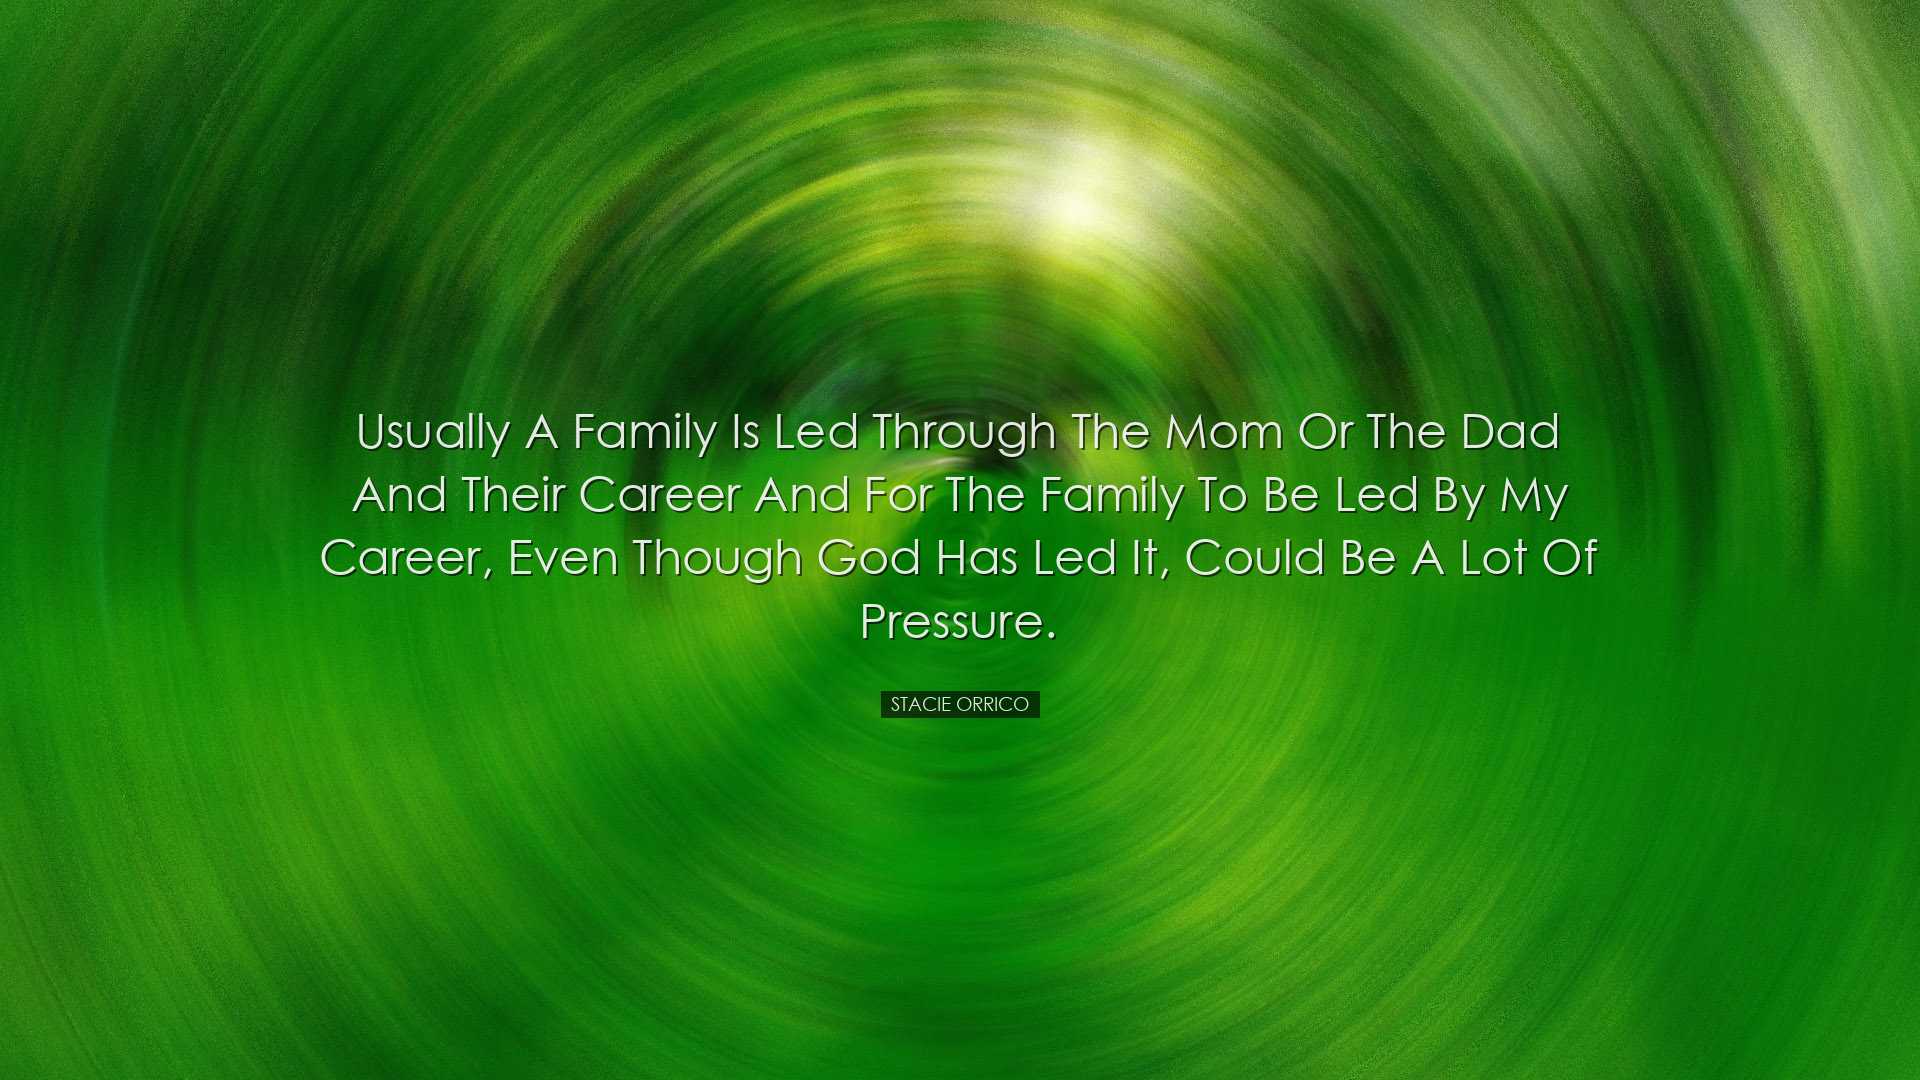 Usually a family is led through the mom or the dad and their caree